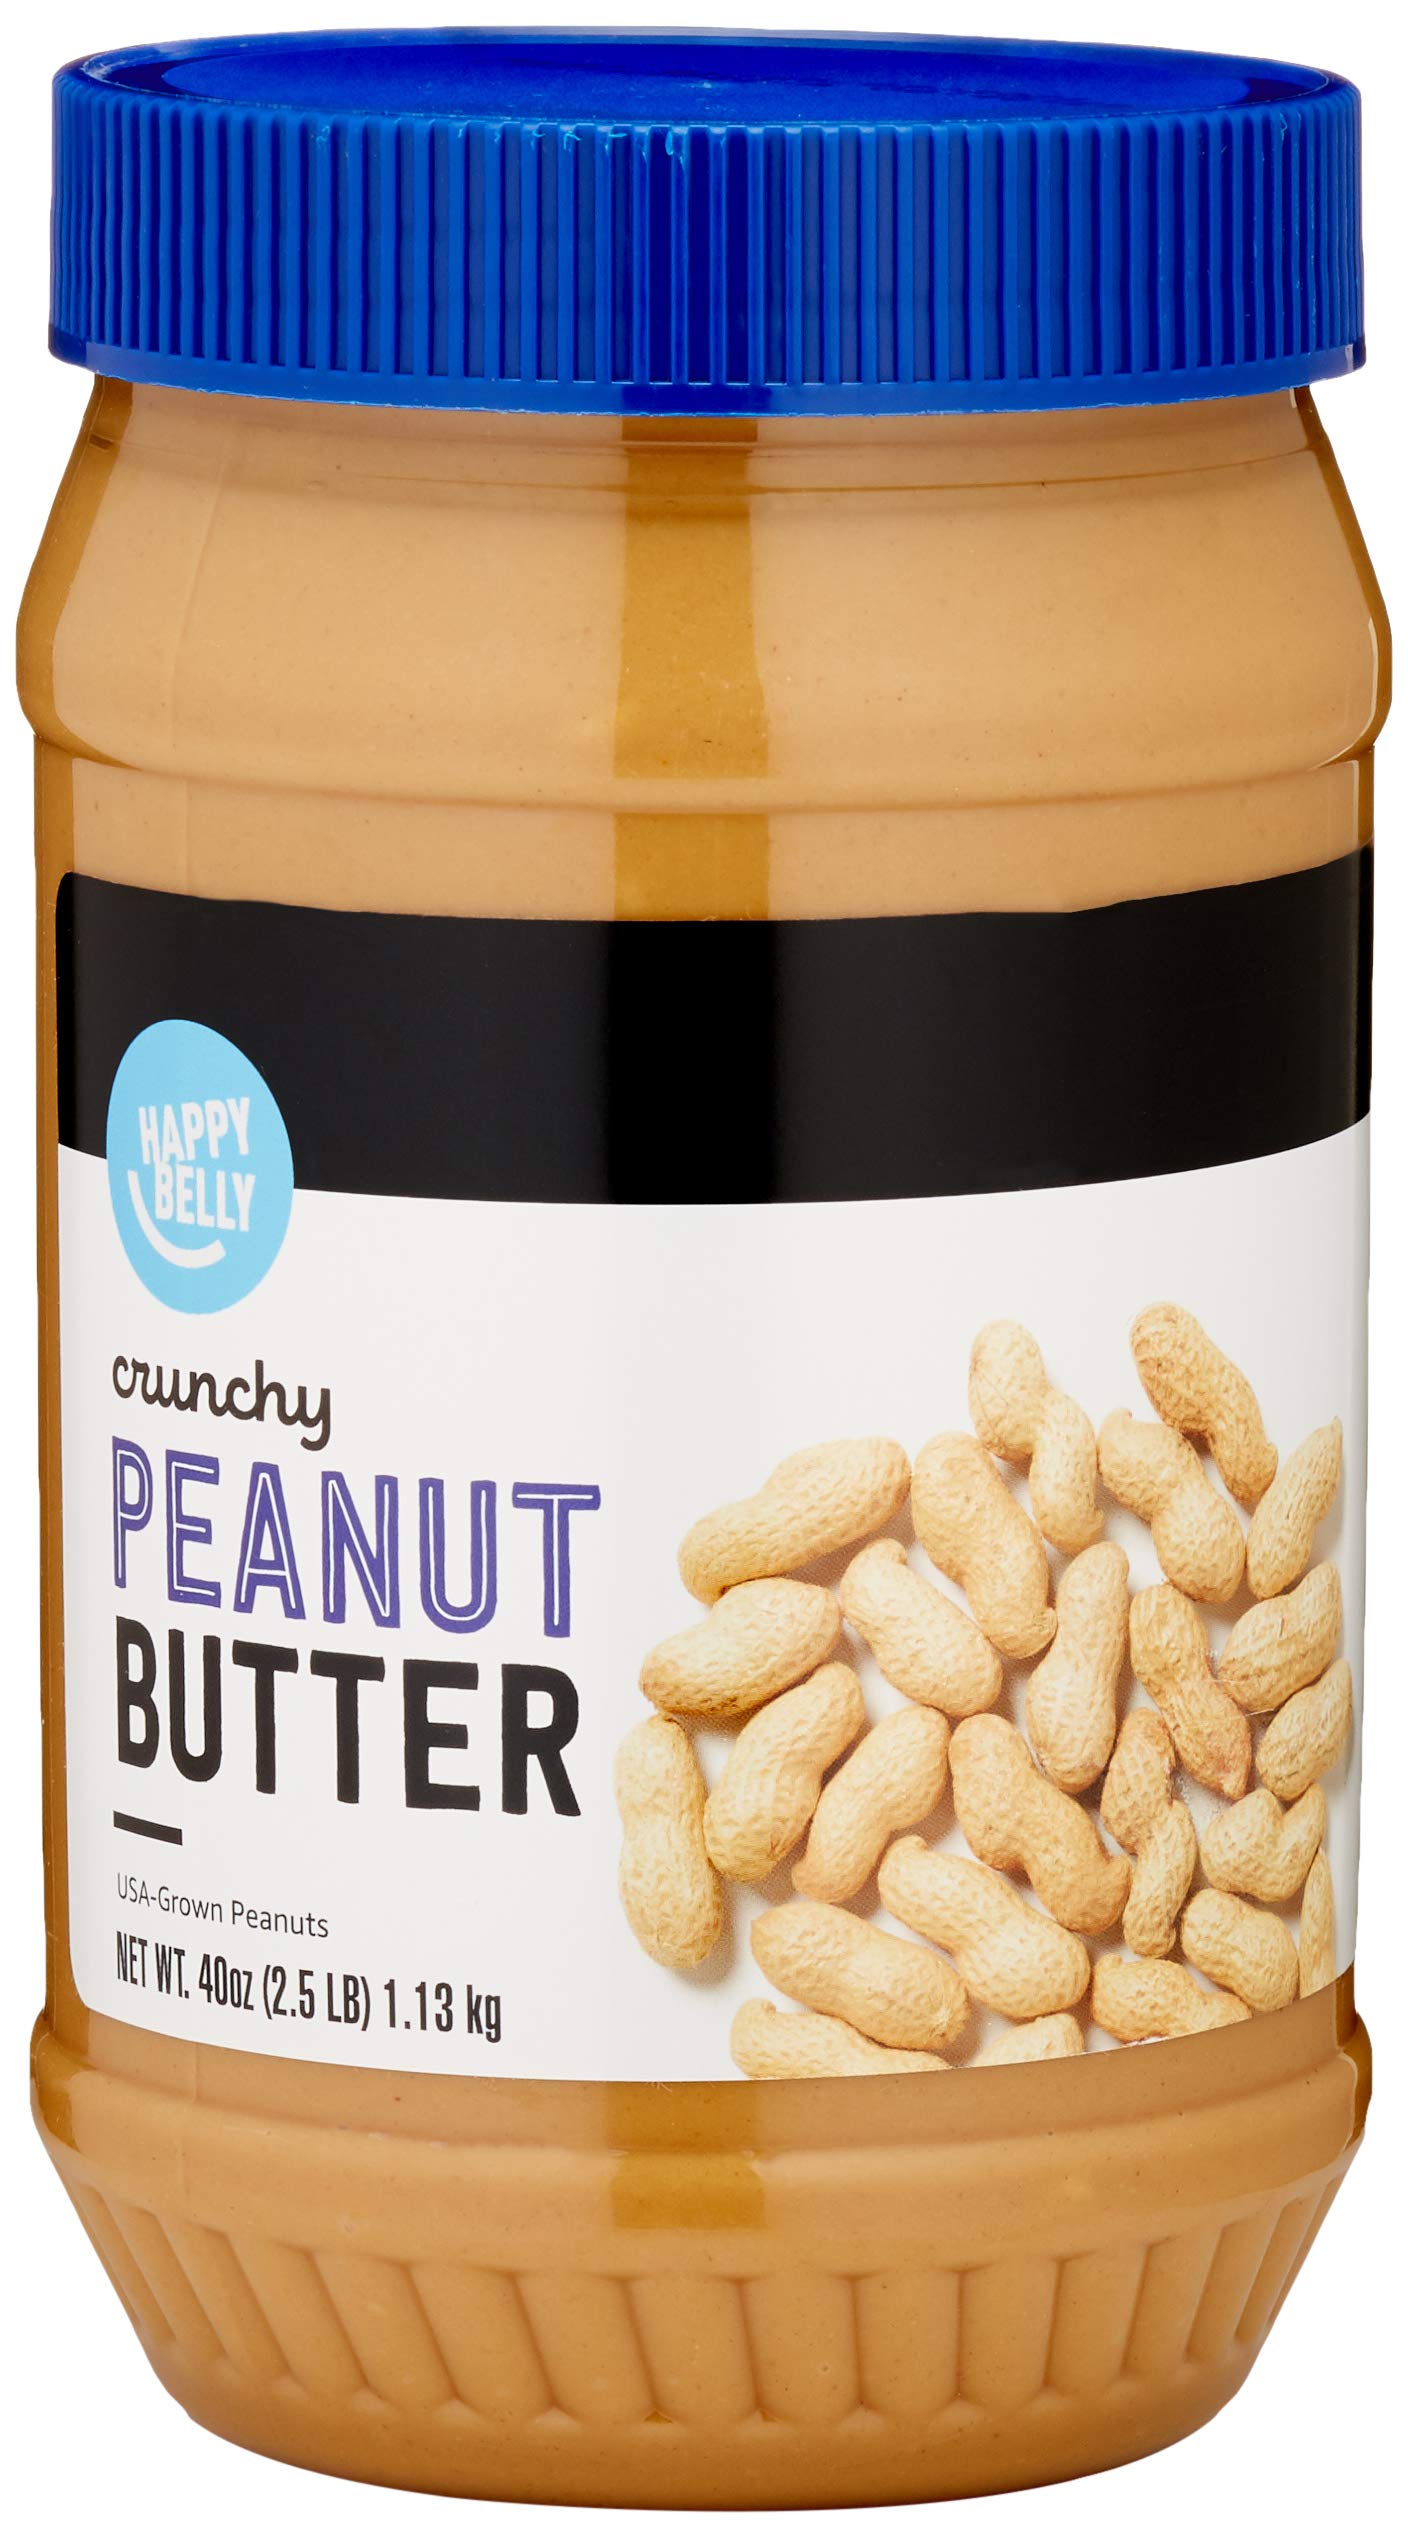 Amazon Happy Belly Crunchy Peanut Butter, 2.5 Pound, $0.09/Oz, Pack of 1, Free Shipping w/ Prime $3.61